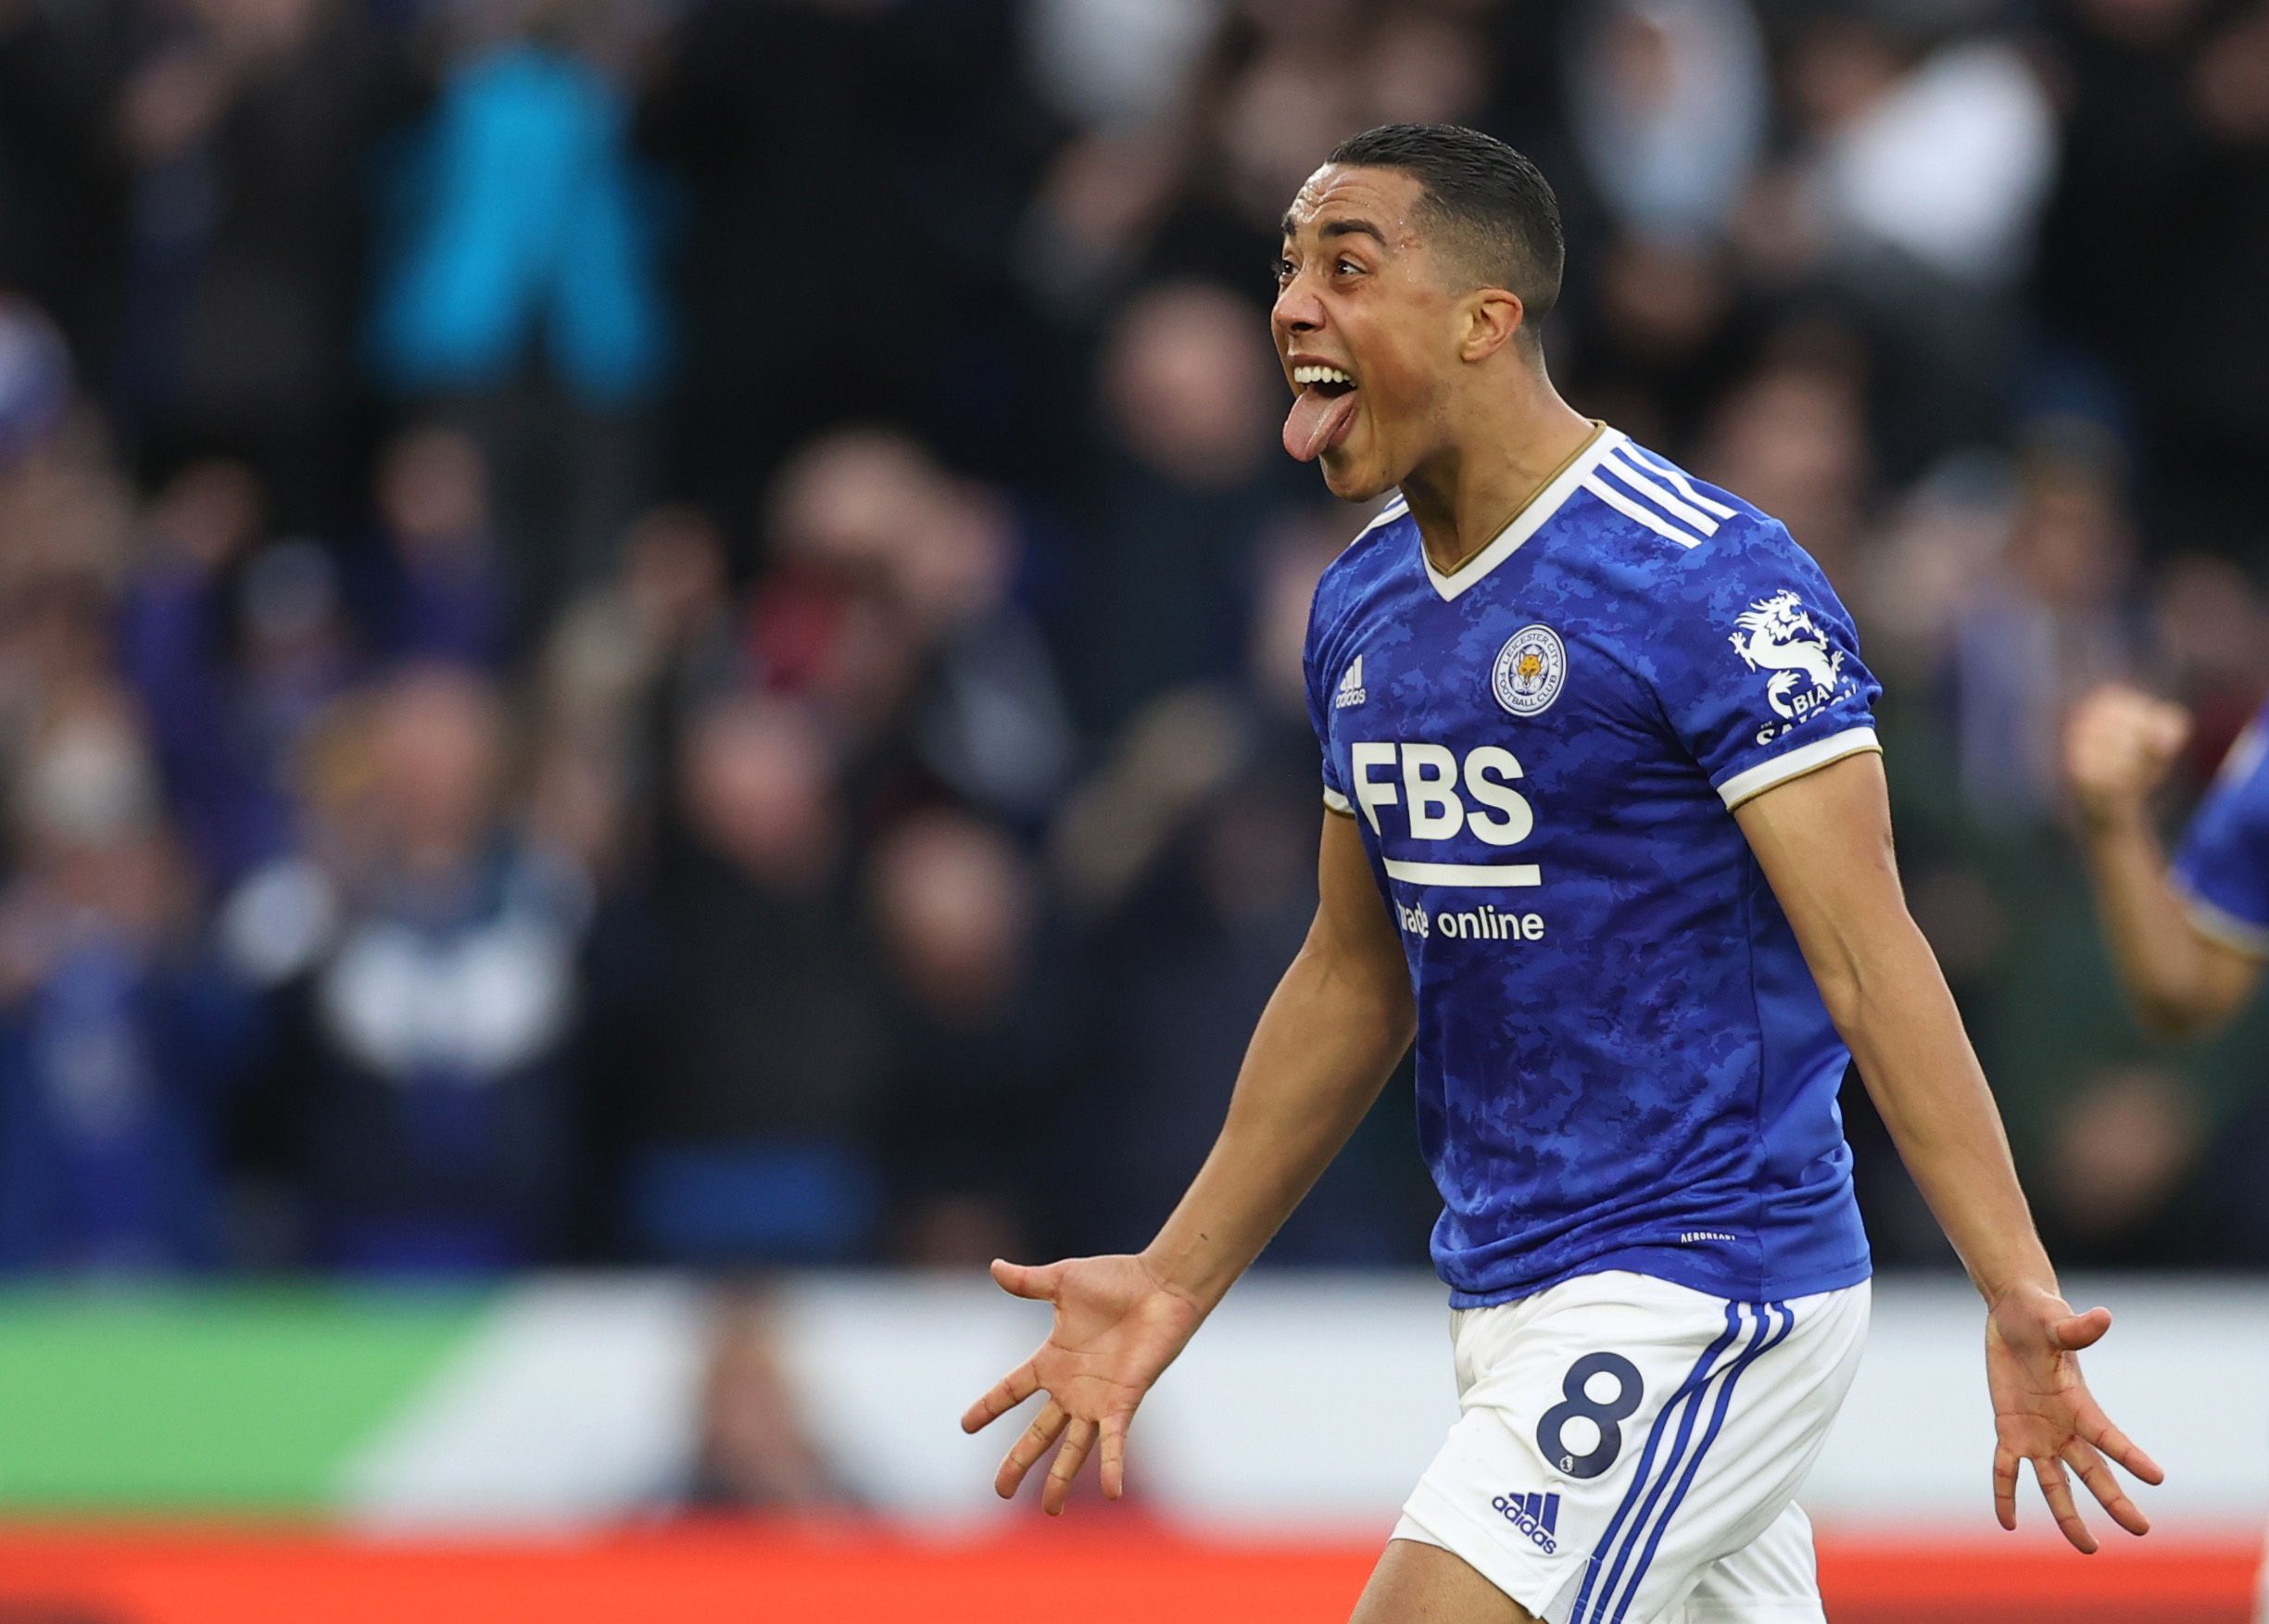 Soccer Football - Premier League - Leicester City v Newcastle United - King Power Stadium, Leicester, Britain - December 12, 2021 Leicester City's Youri Tielemans celebrates scoring their first goal Action Images via Reuters/Carl Recine EDITORIAL USE ONLY. No use with unauthorized audio, video, data, fixture lists, club/league logos or 'live' services. Online in-match use limited to 75 images, no video emulation. No use in betting, games or single club /league/player publications.  Please contac